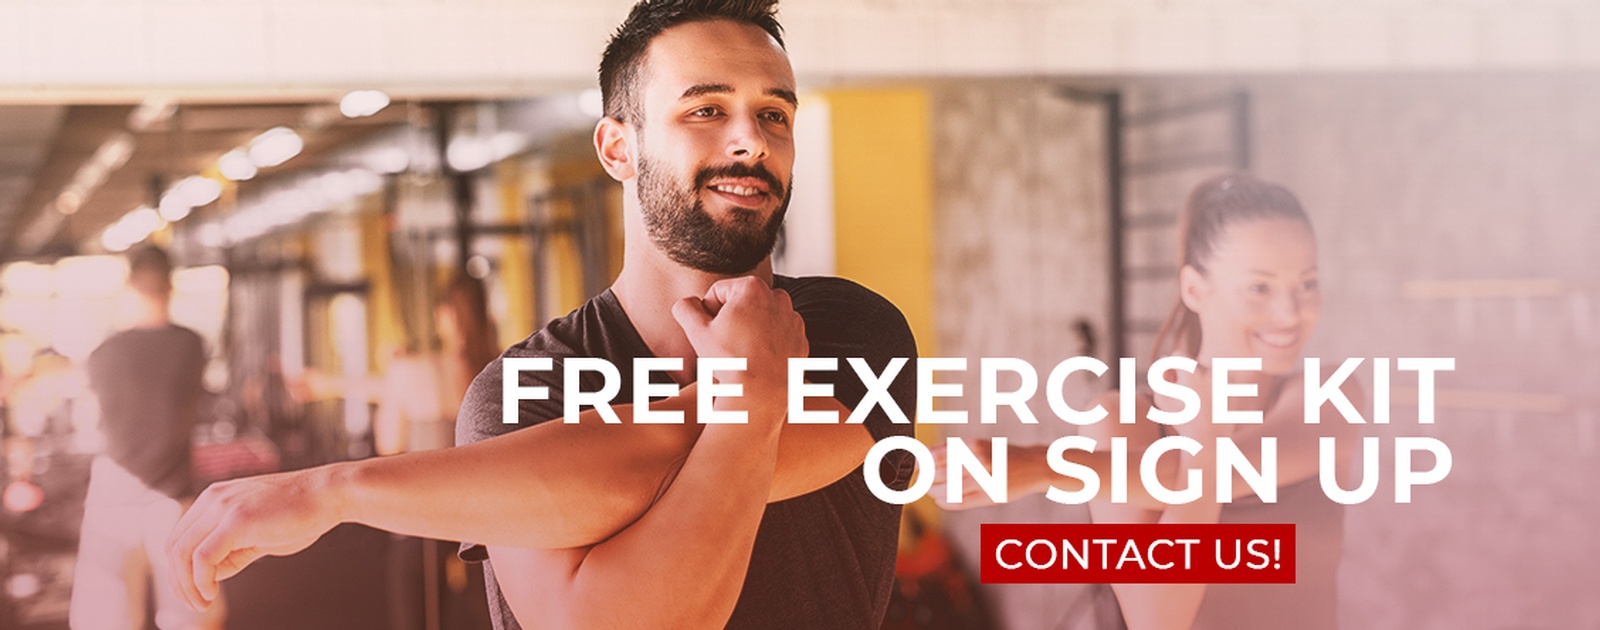 Free Exercise Kit On Sign Up 